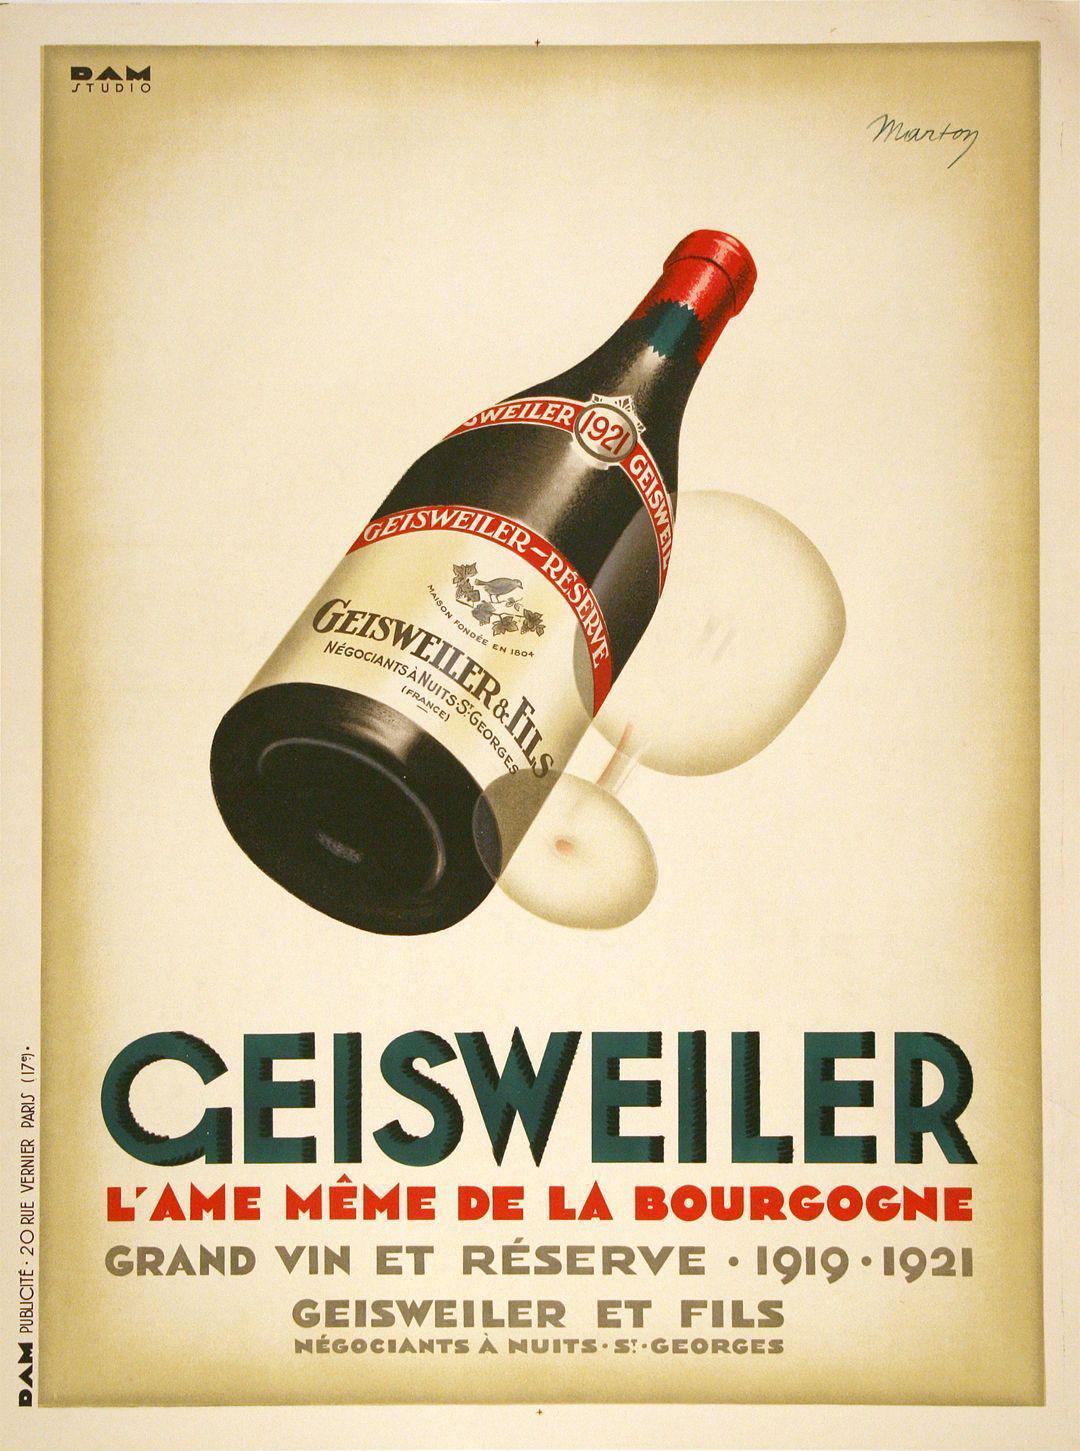 Geisweiler Original French Wine Poster by Lajos Marton